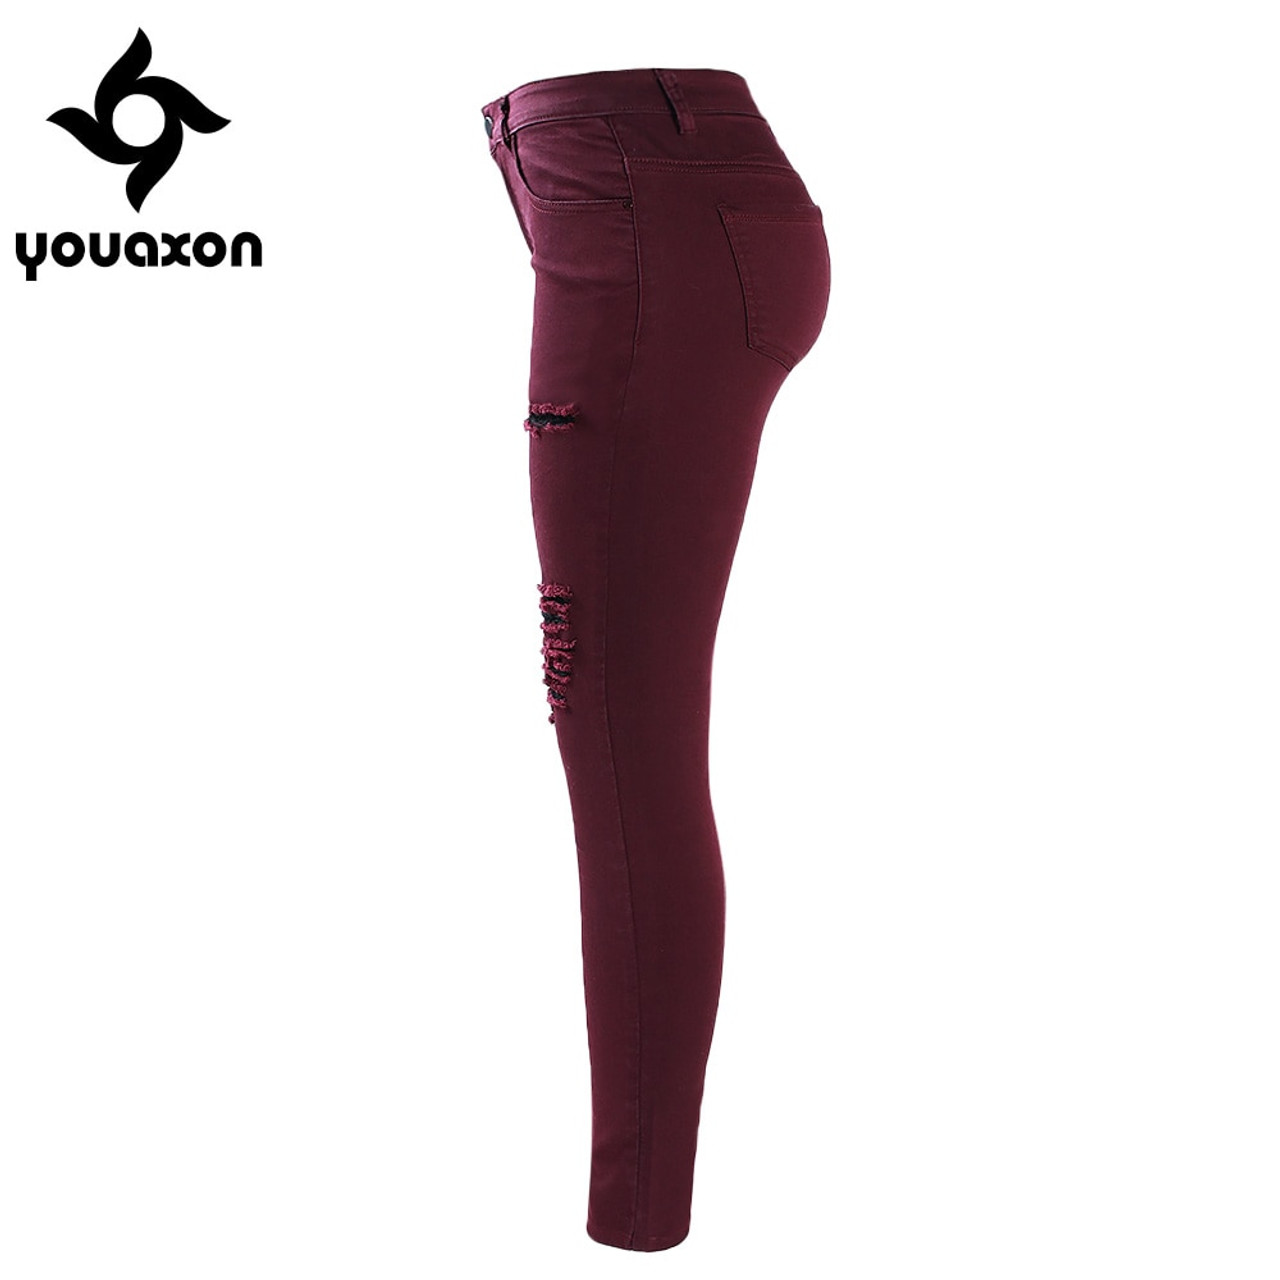 maroon ripped jeans